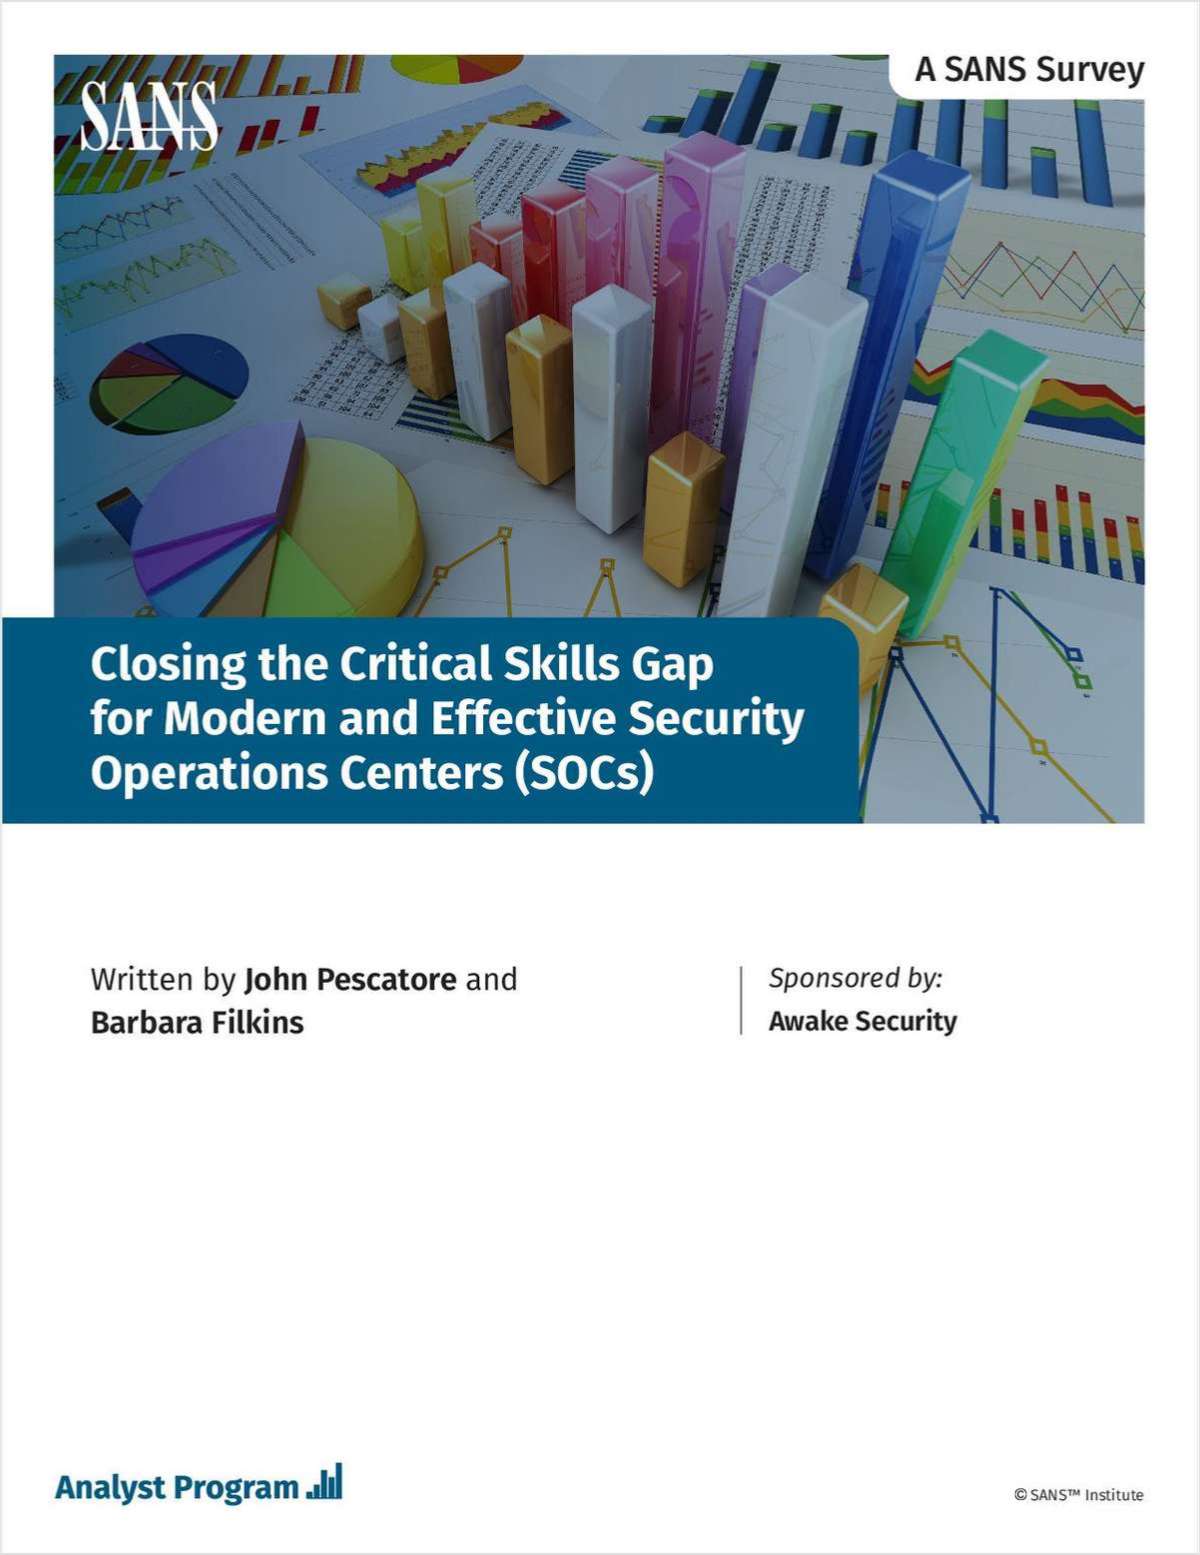 Closing the Critical Skills Gap for Modern & Effective SOCs by SANS